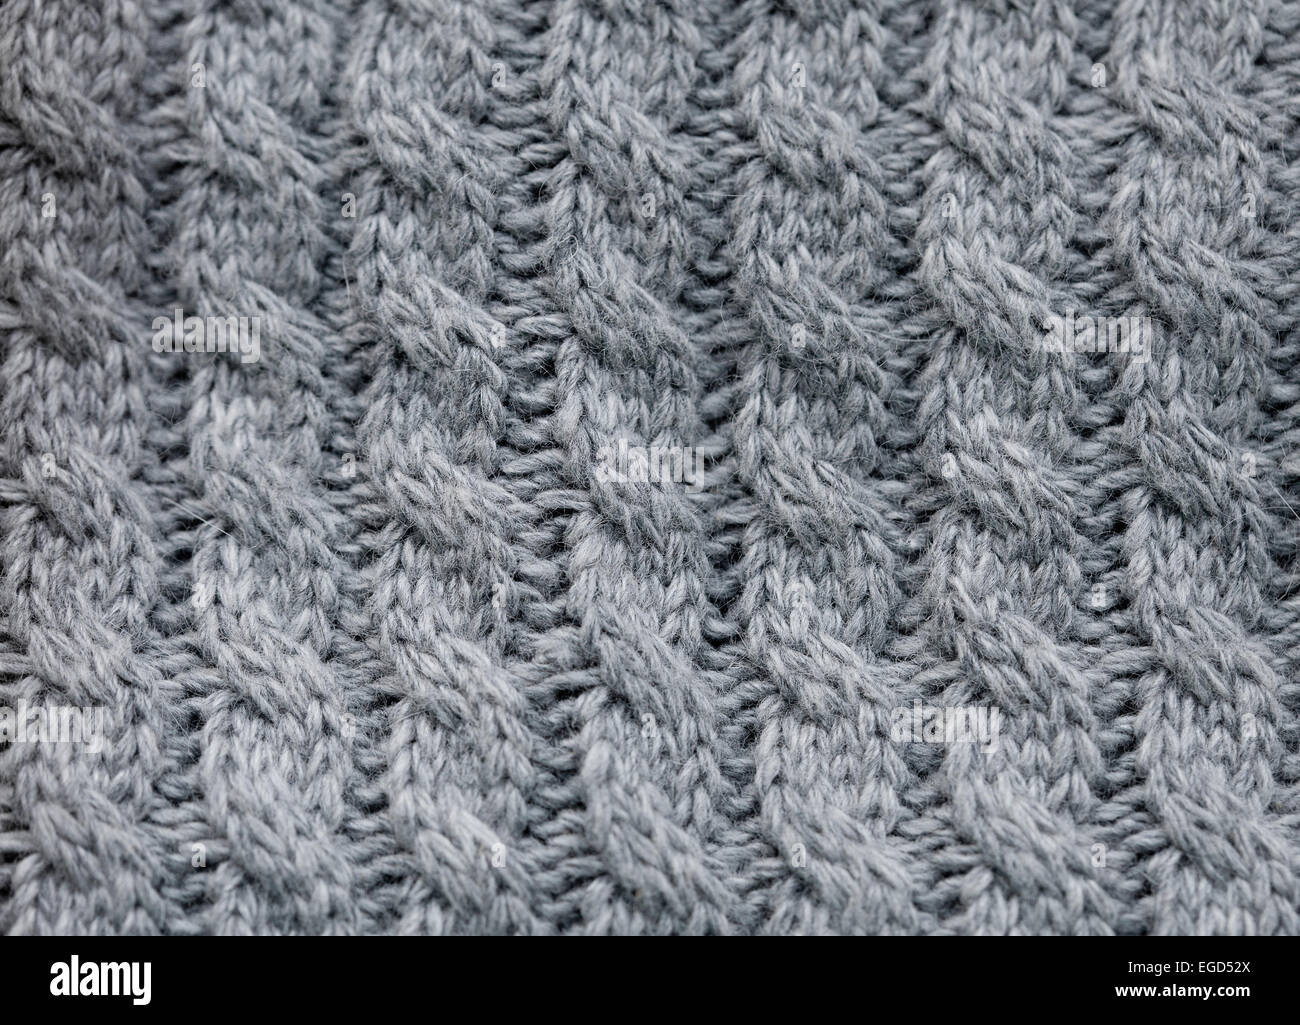 Gray Knitted Wool Fabric Background Stock Photo Royalty Free